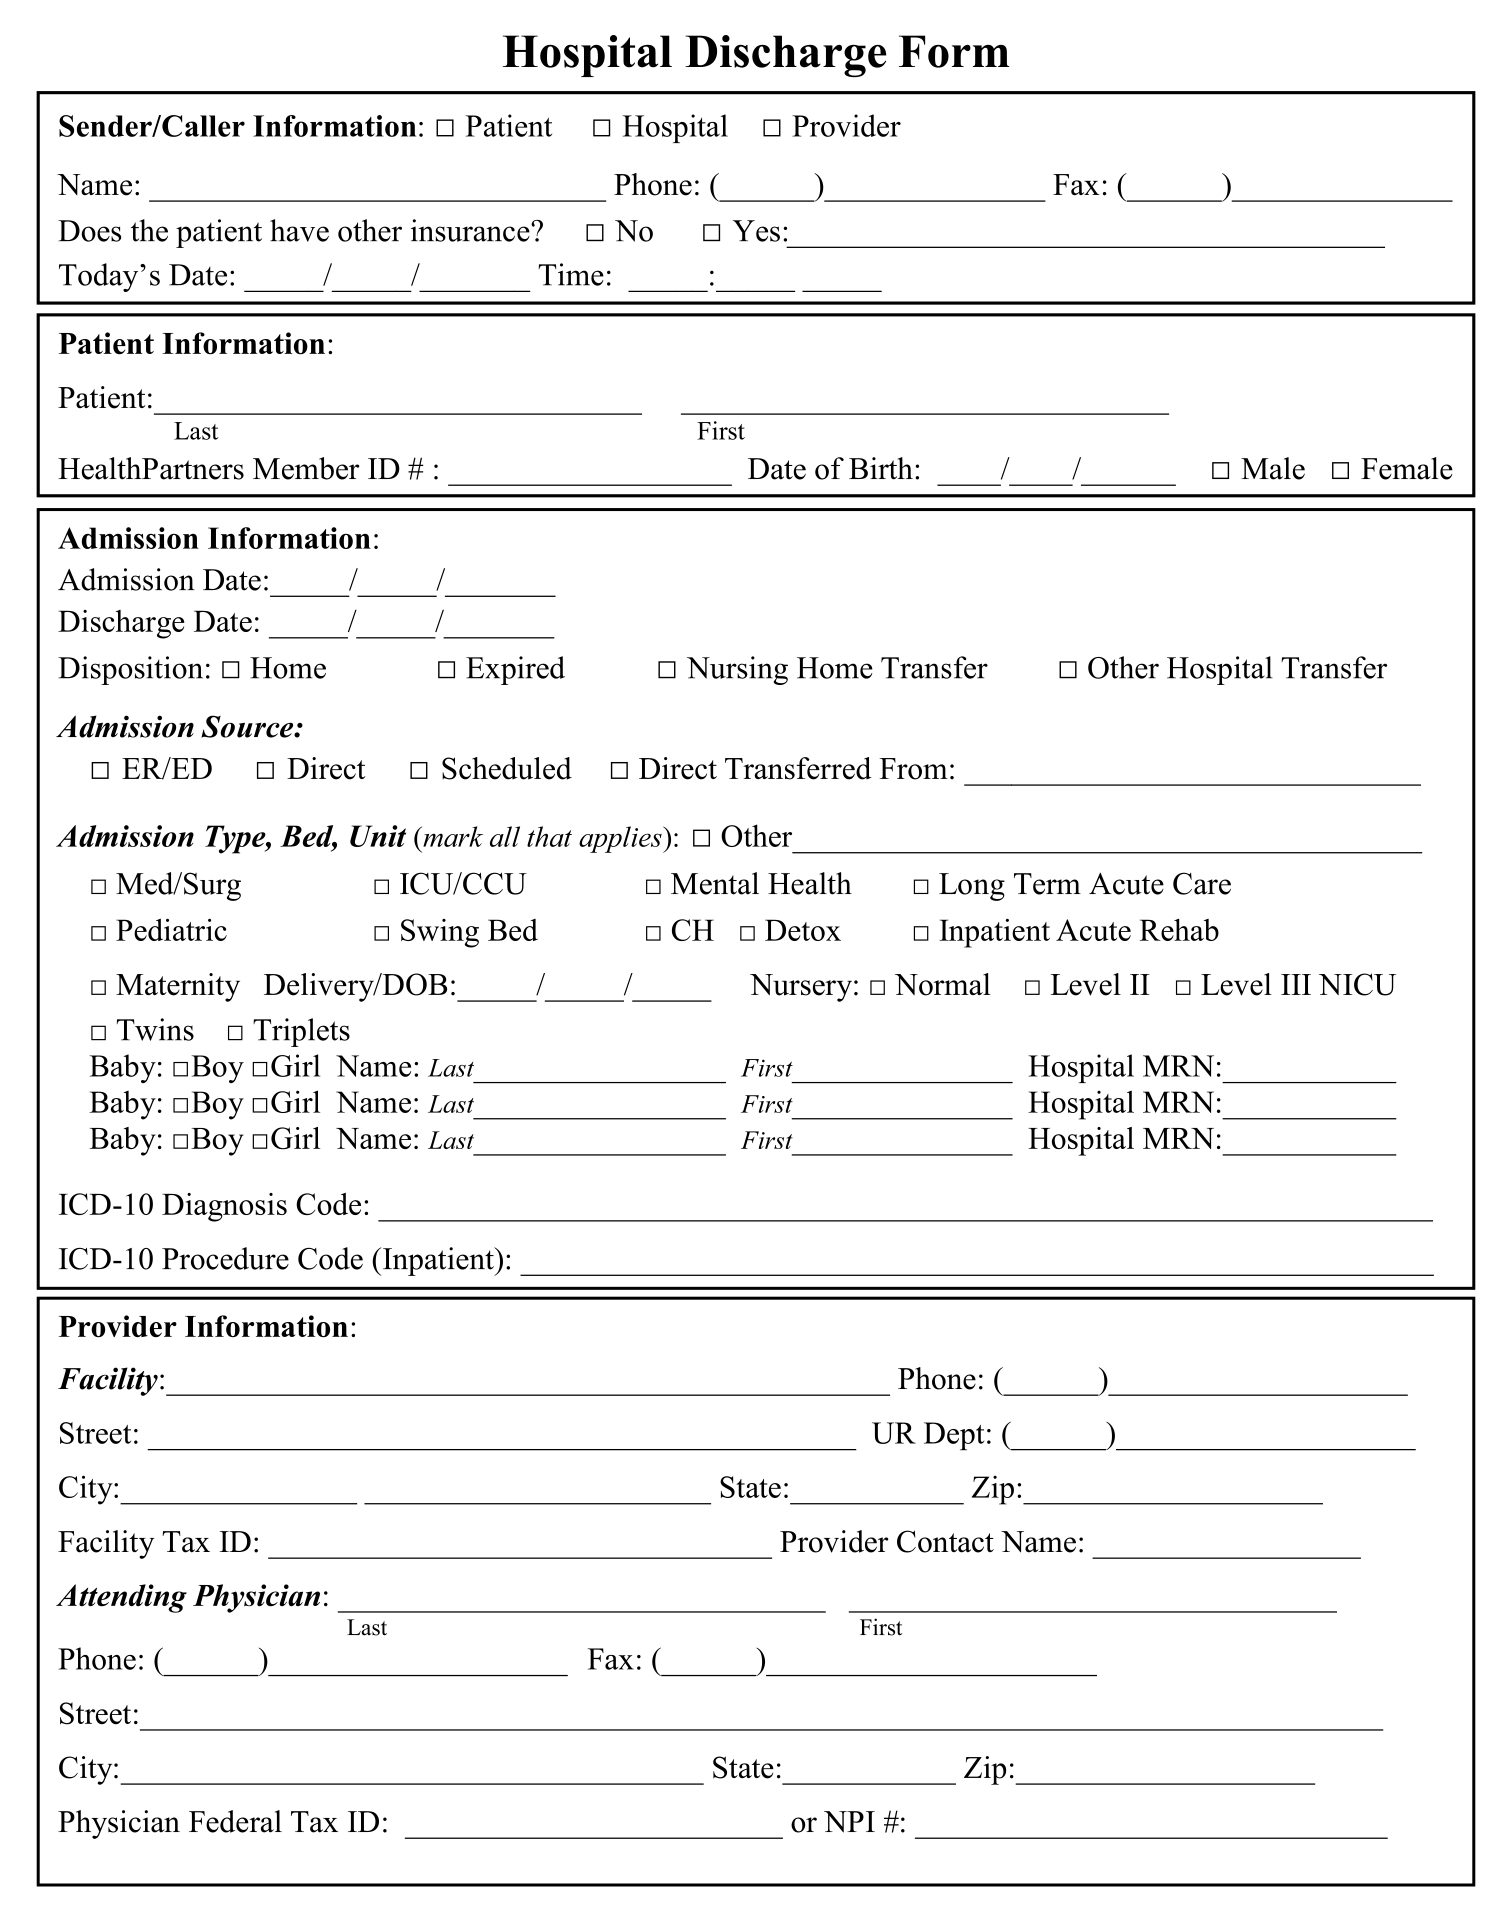 Free Hospital Discharge Form Template